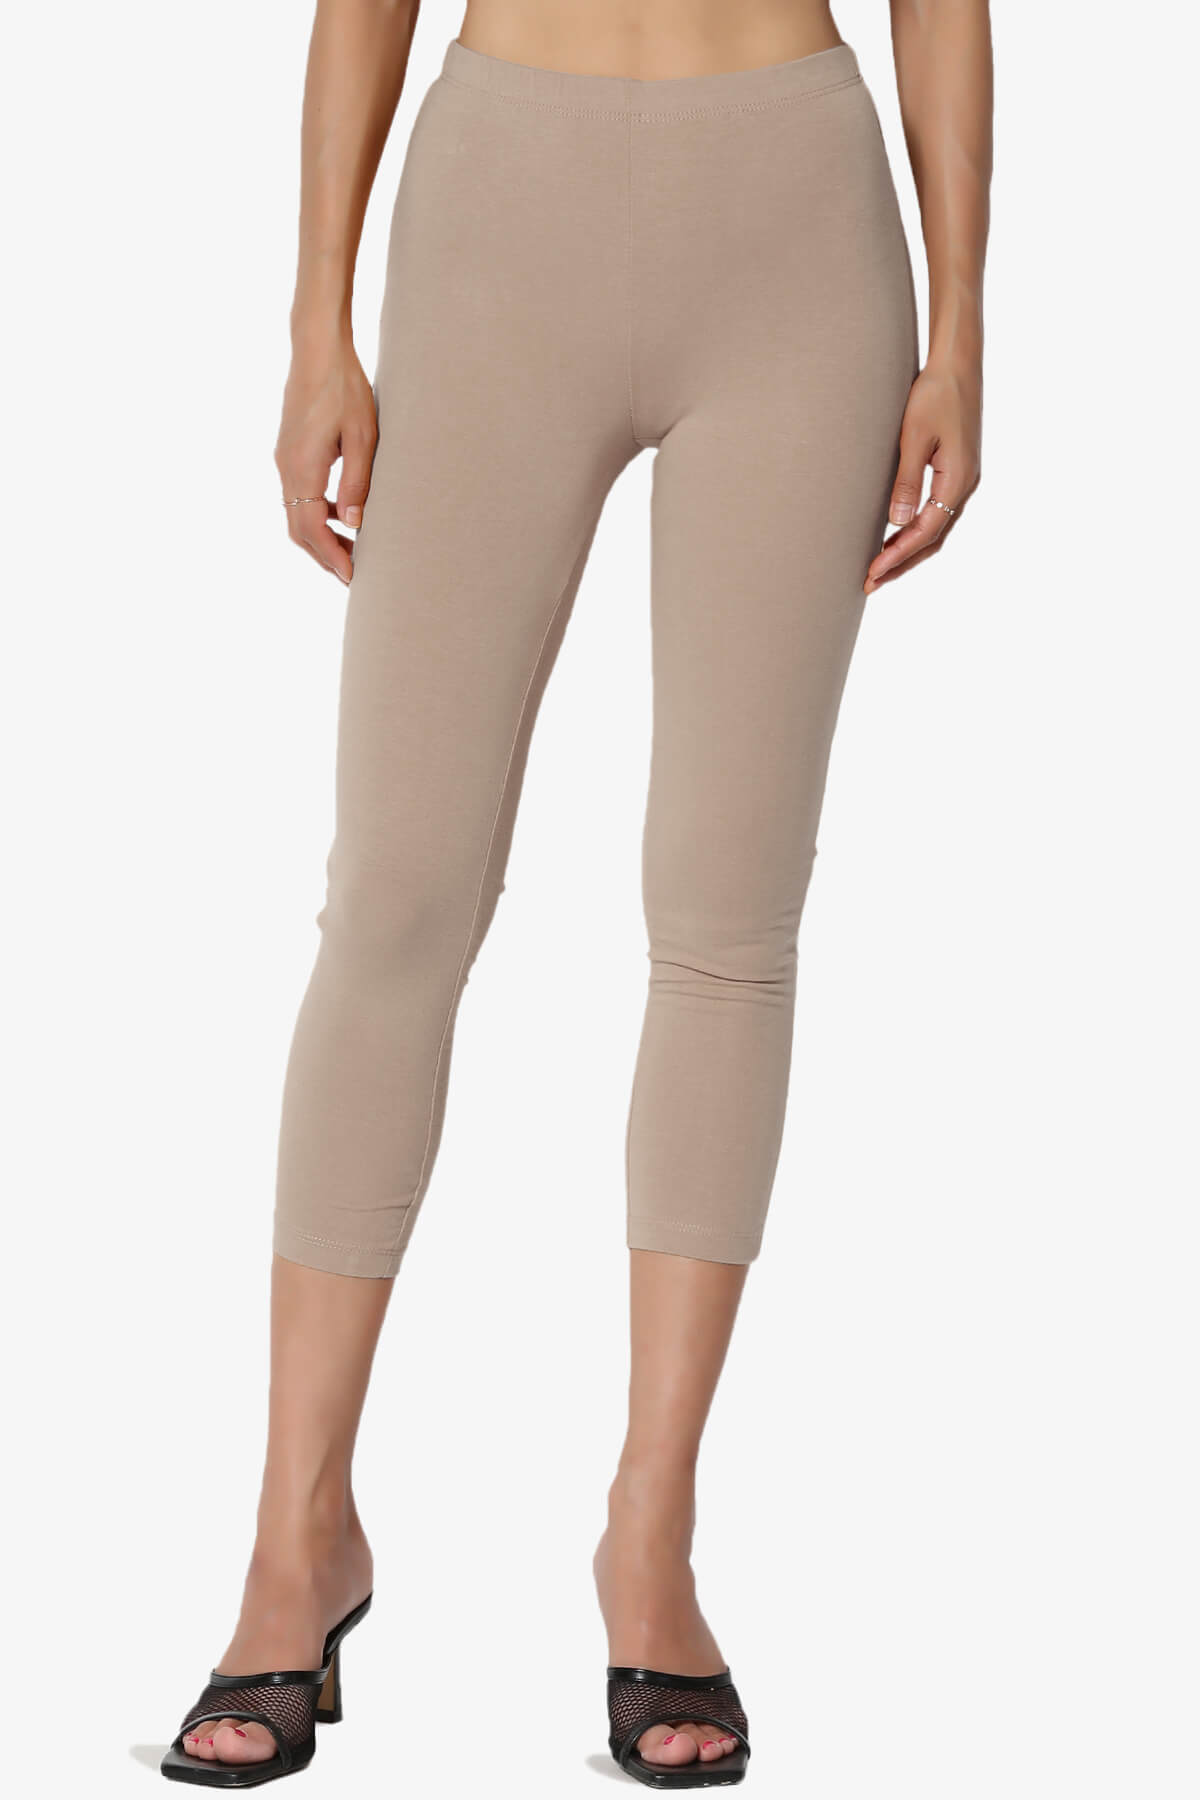 Load image into Gallery viewer, Ansley Luxe Cotton Capri Leggings LIGHT MOCHA_1
